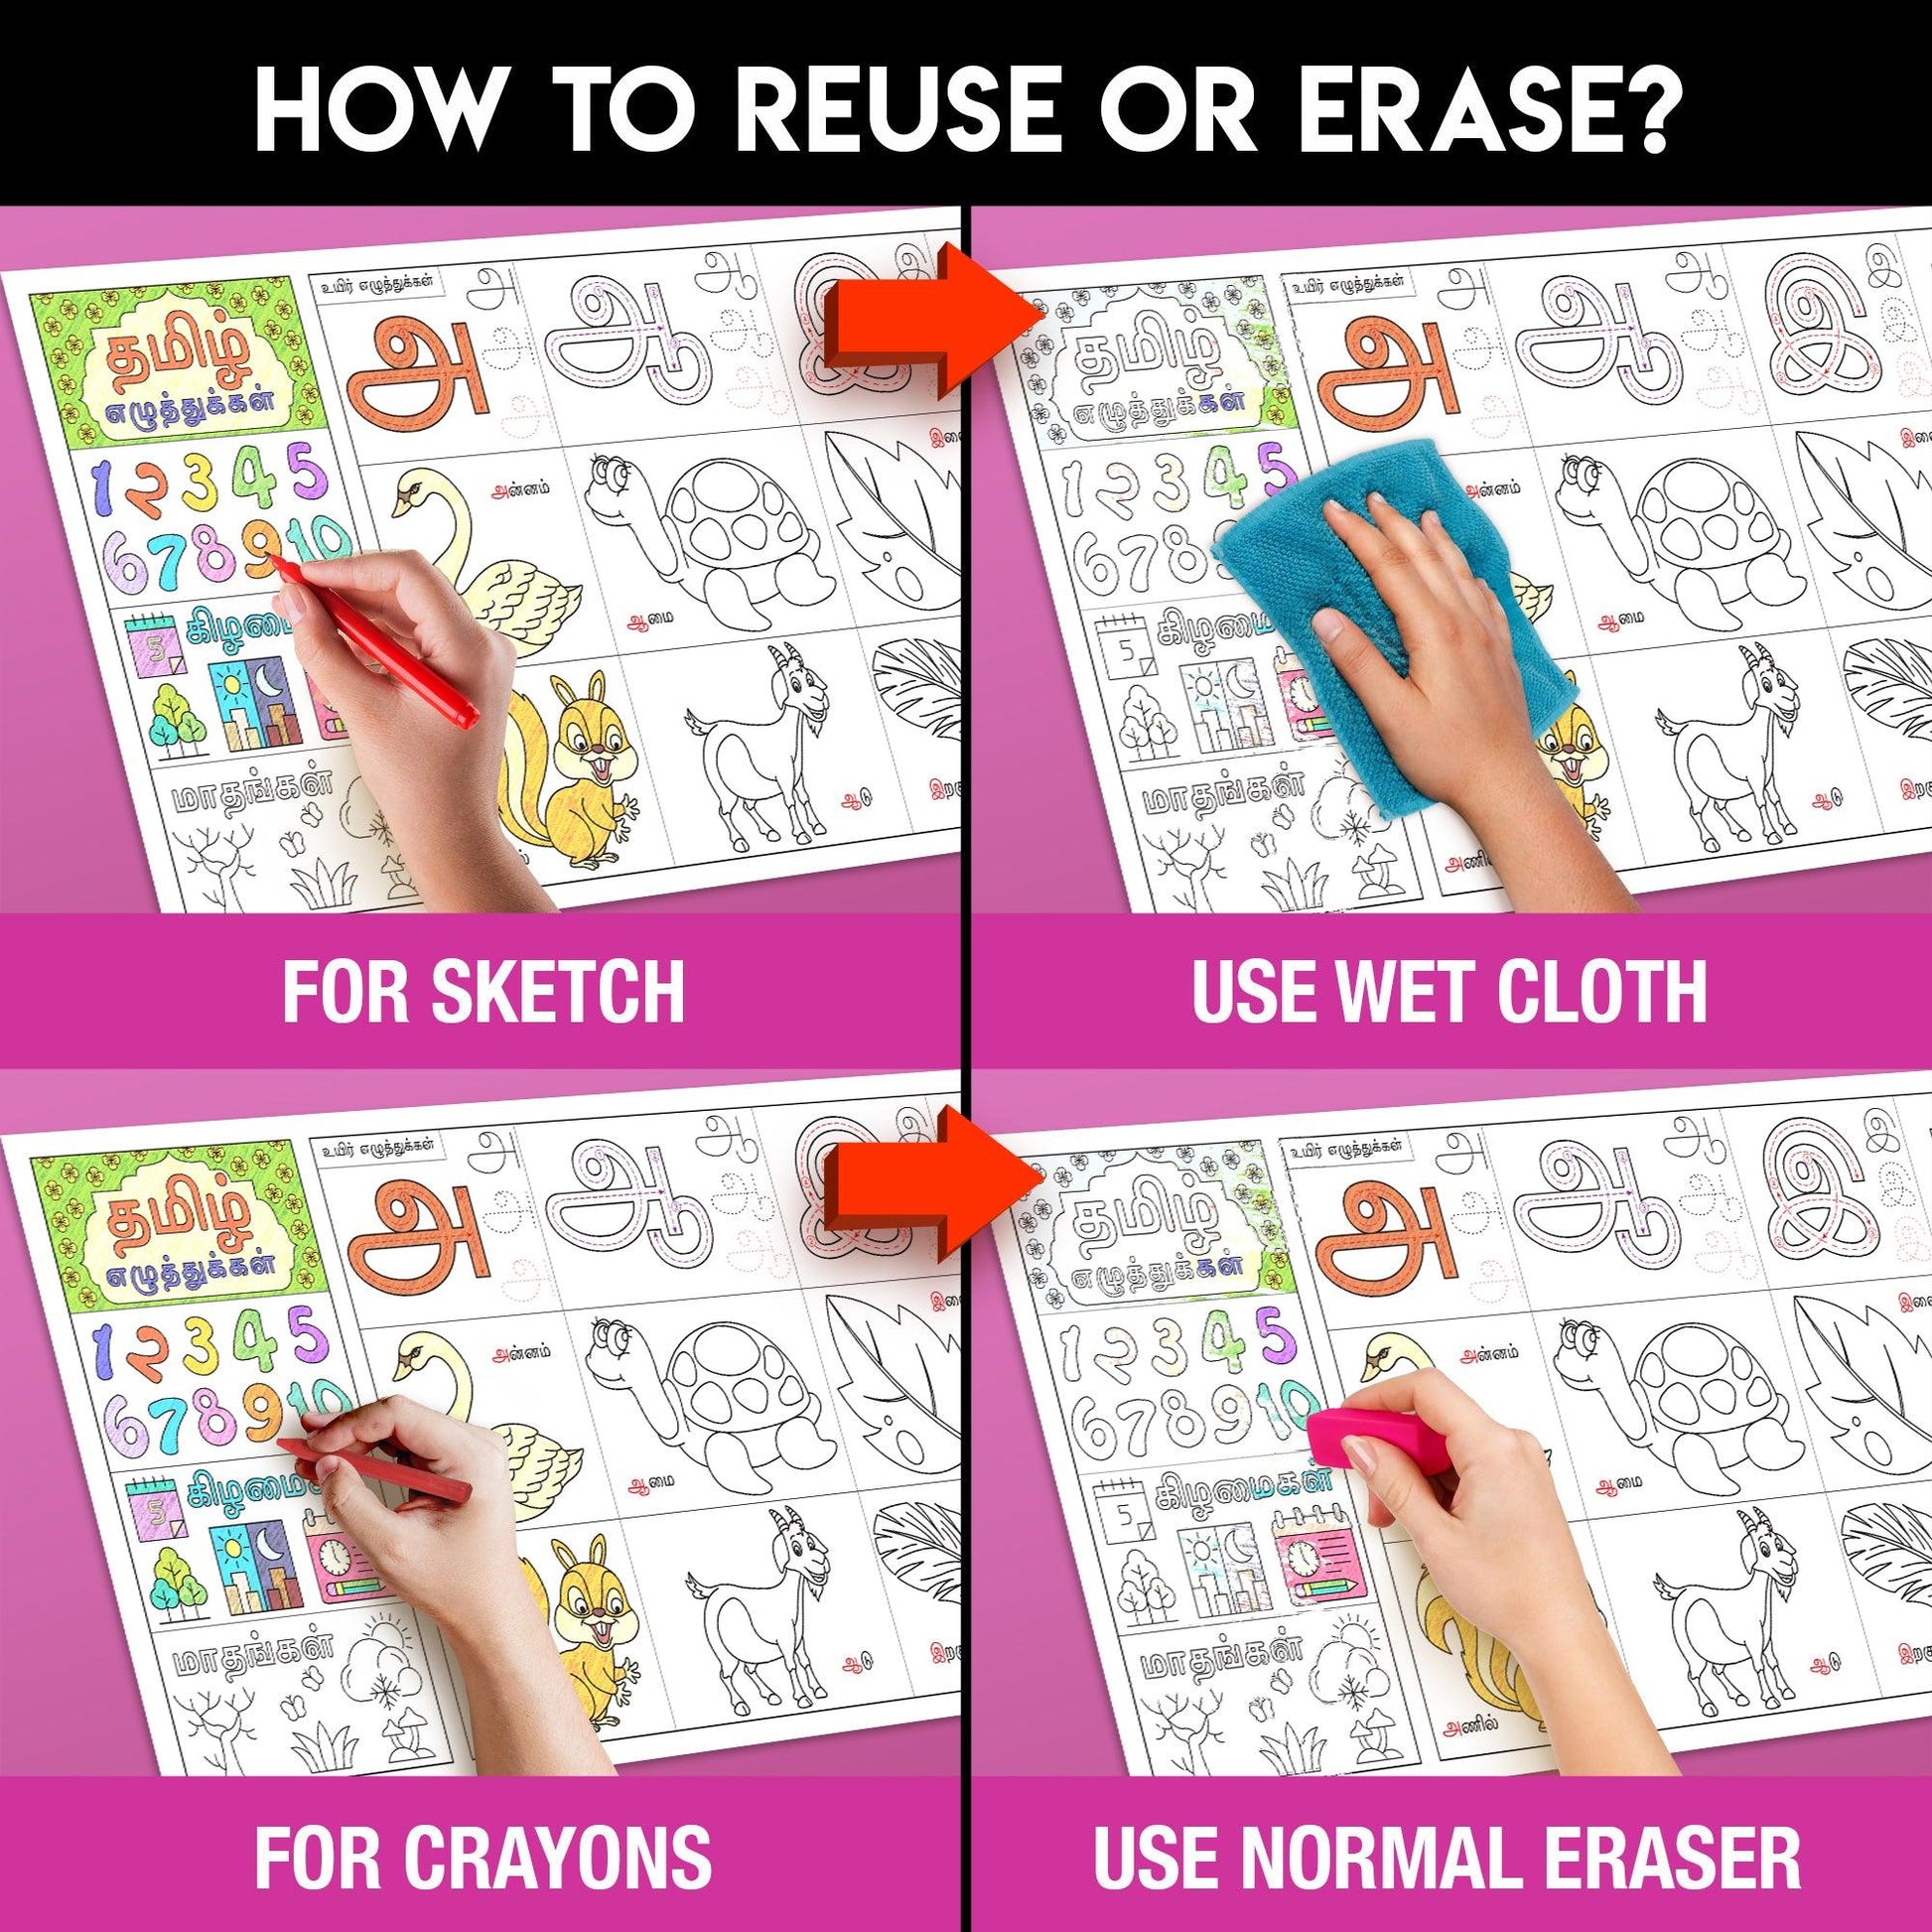 The image has a pink background with four pictures demonstrating how to reuse or erase: the first picture depicts sketching on the sheet, the second shows using a wet cloth to remove sketches, the third image displays crayons colouring on the sheet, and the fourth image illustrates erasing crayons with a regular eraser.